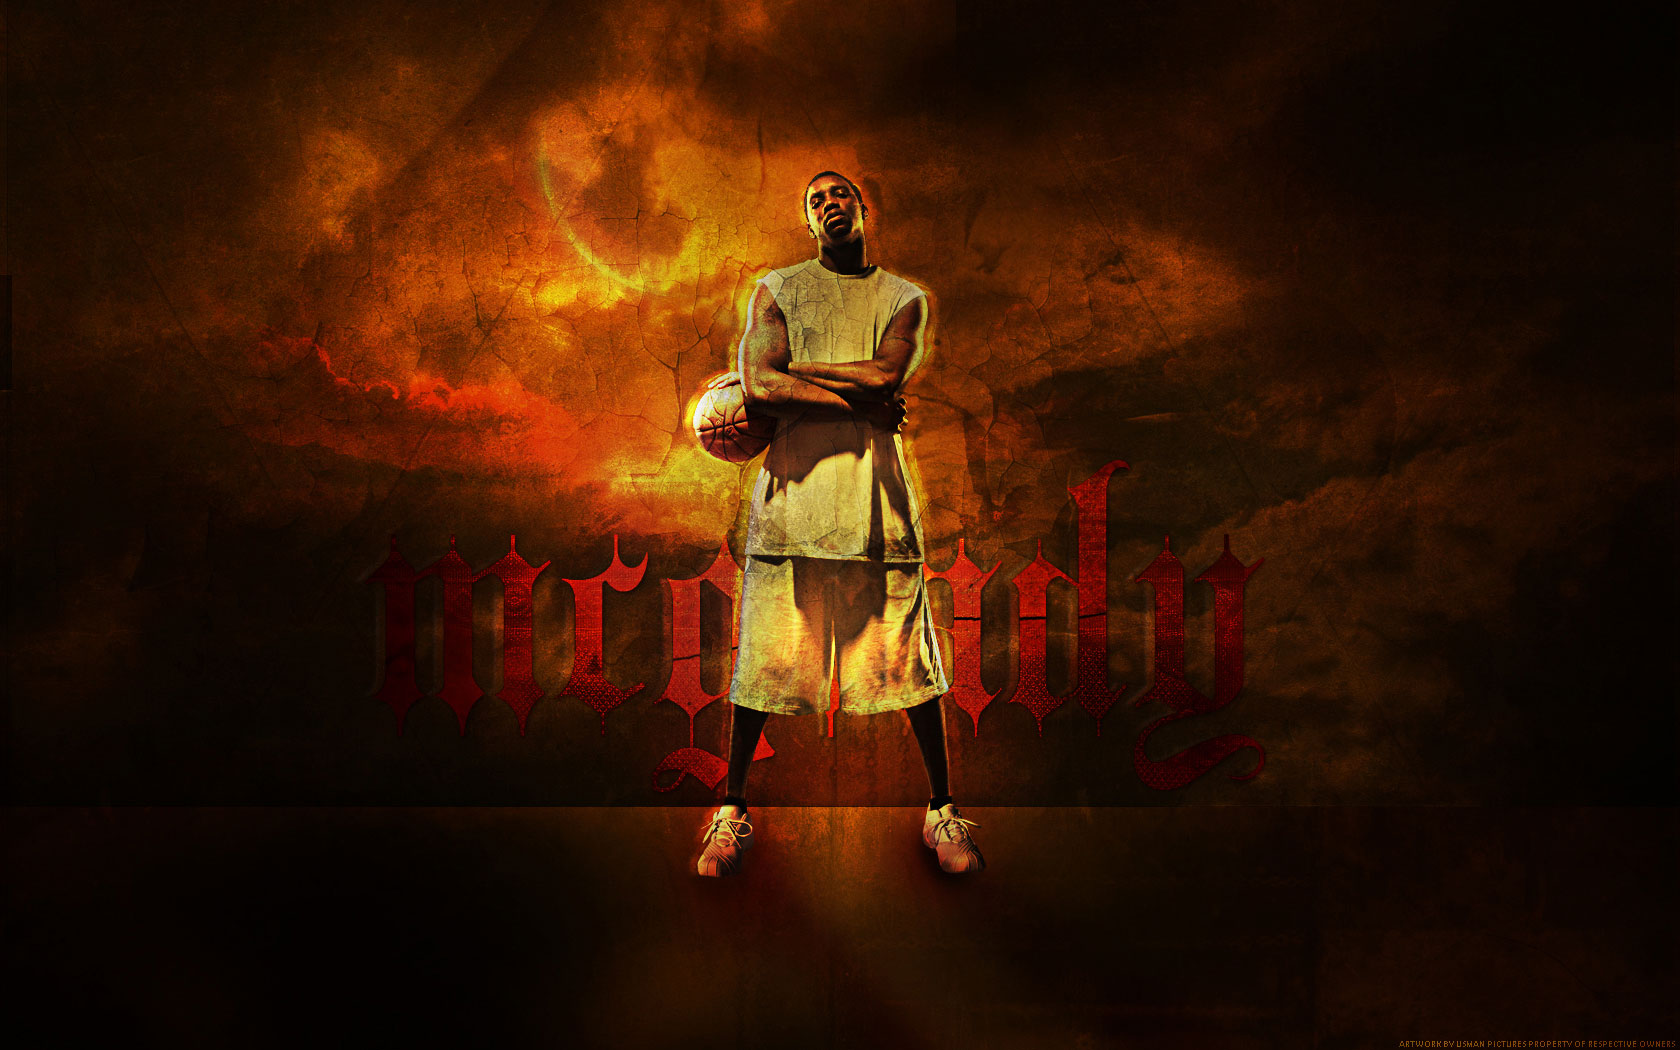  are wallpapers of T-Mac this first one is a huge widescreen wallpaper 